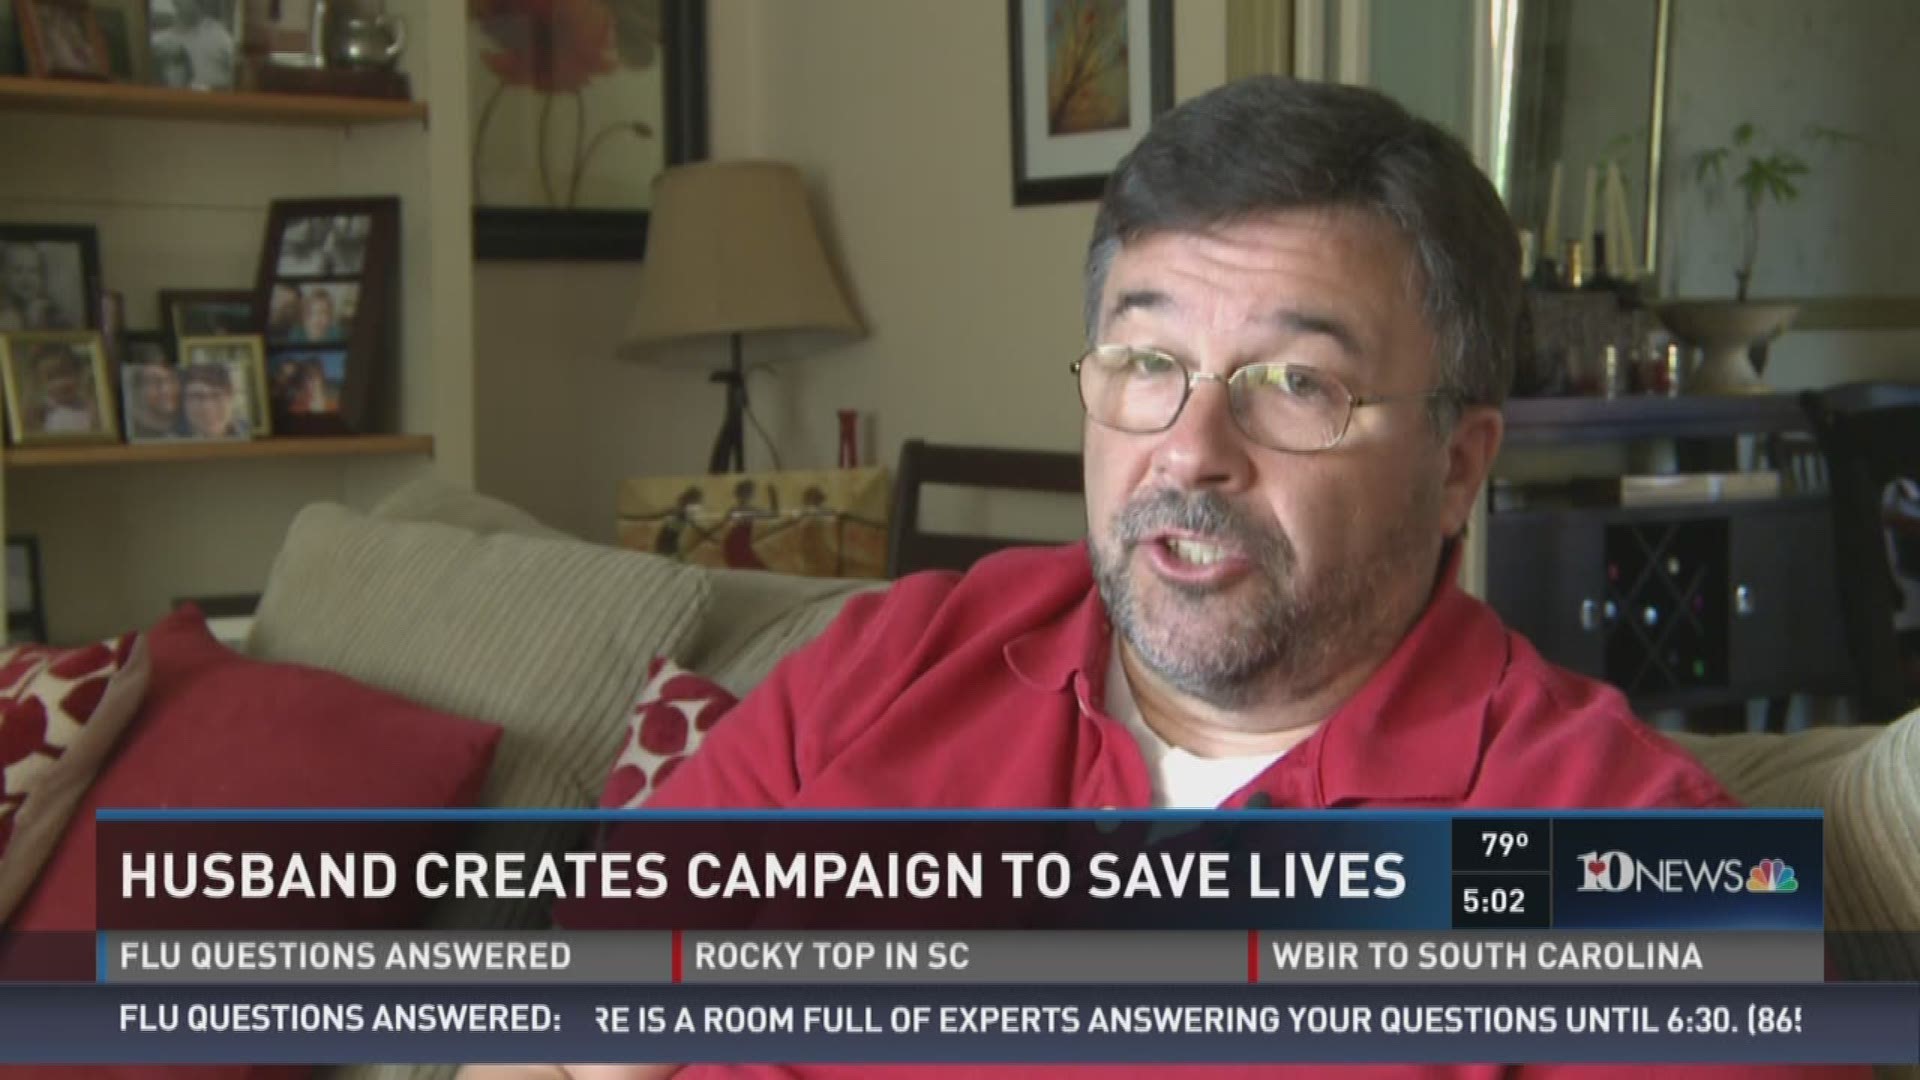 Oct. 28, 2016: A Knoxville man is channeling his grief over his wife's death due to the flu into a campaign to encourage others to get their flu shot.